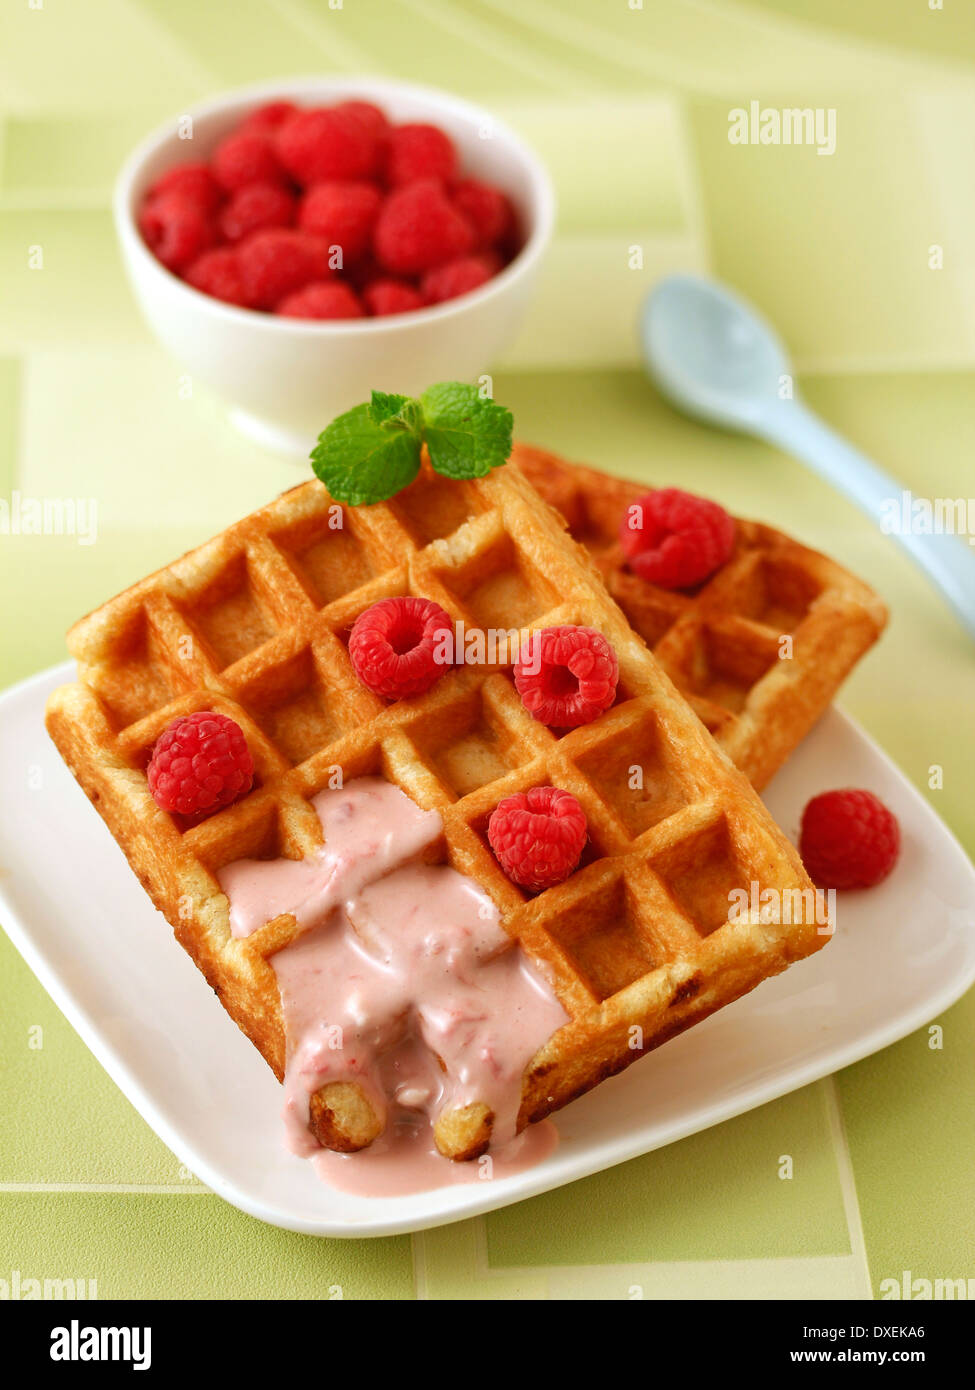 Waffles with raspberries smoothie. Recipe available. Stock Photo